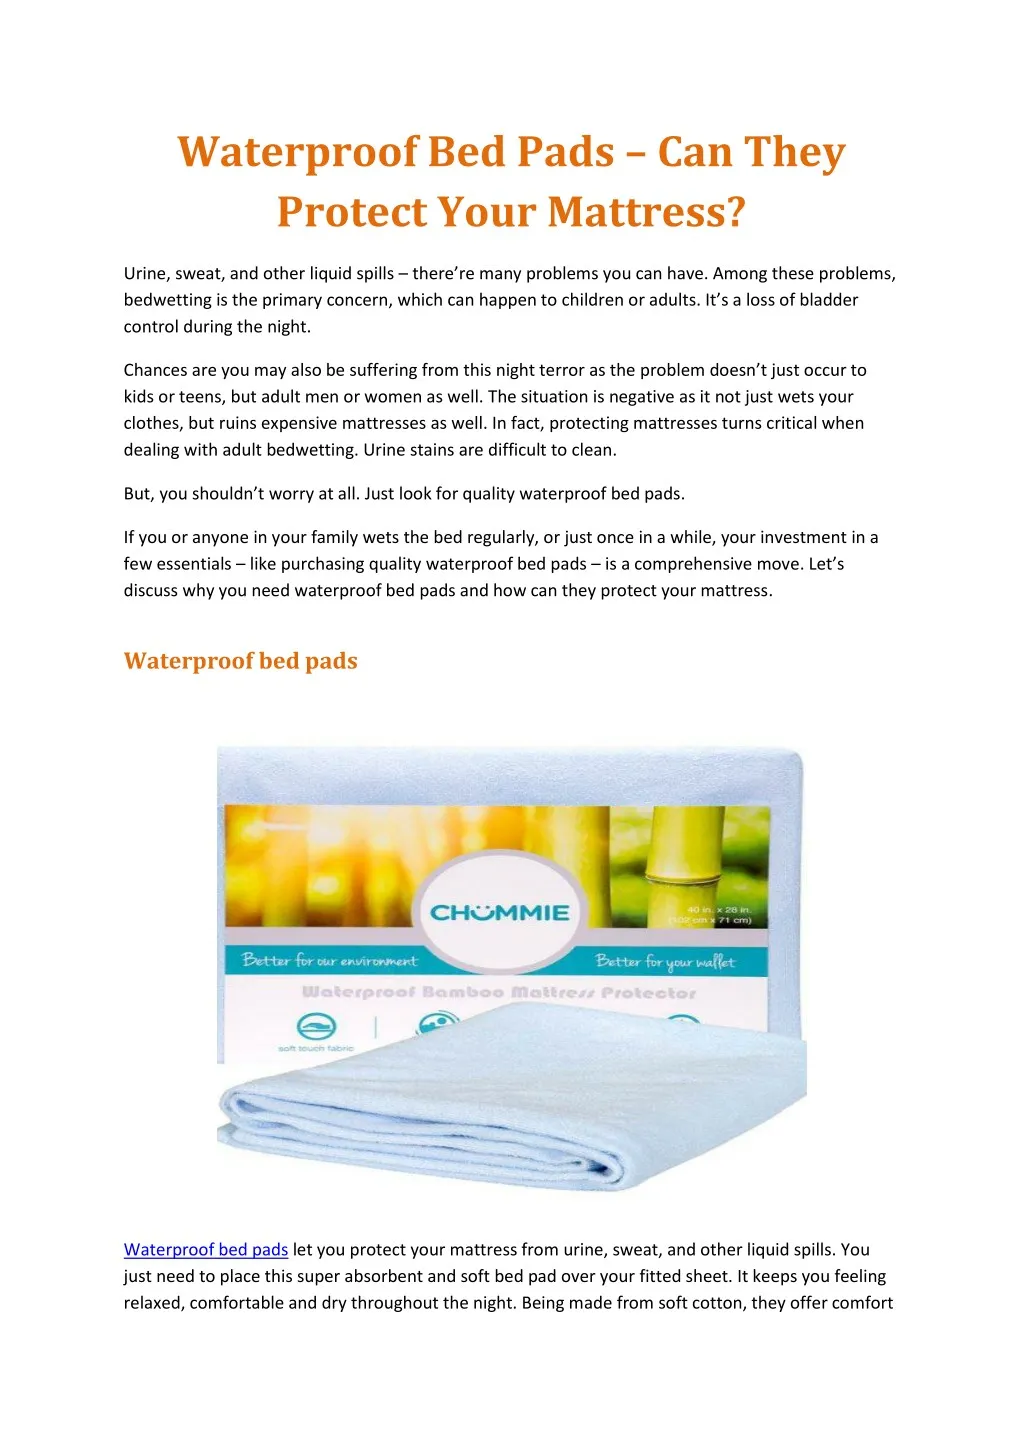 waterproof bed pads can they protect your mattress